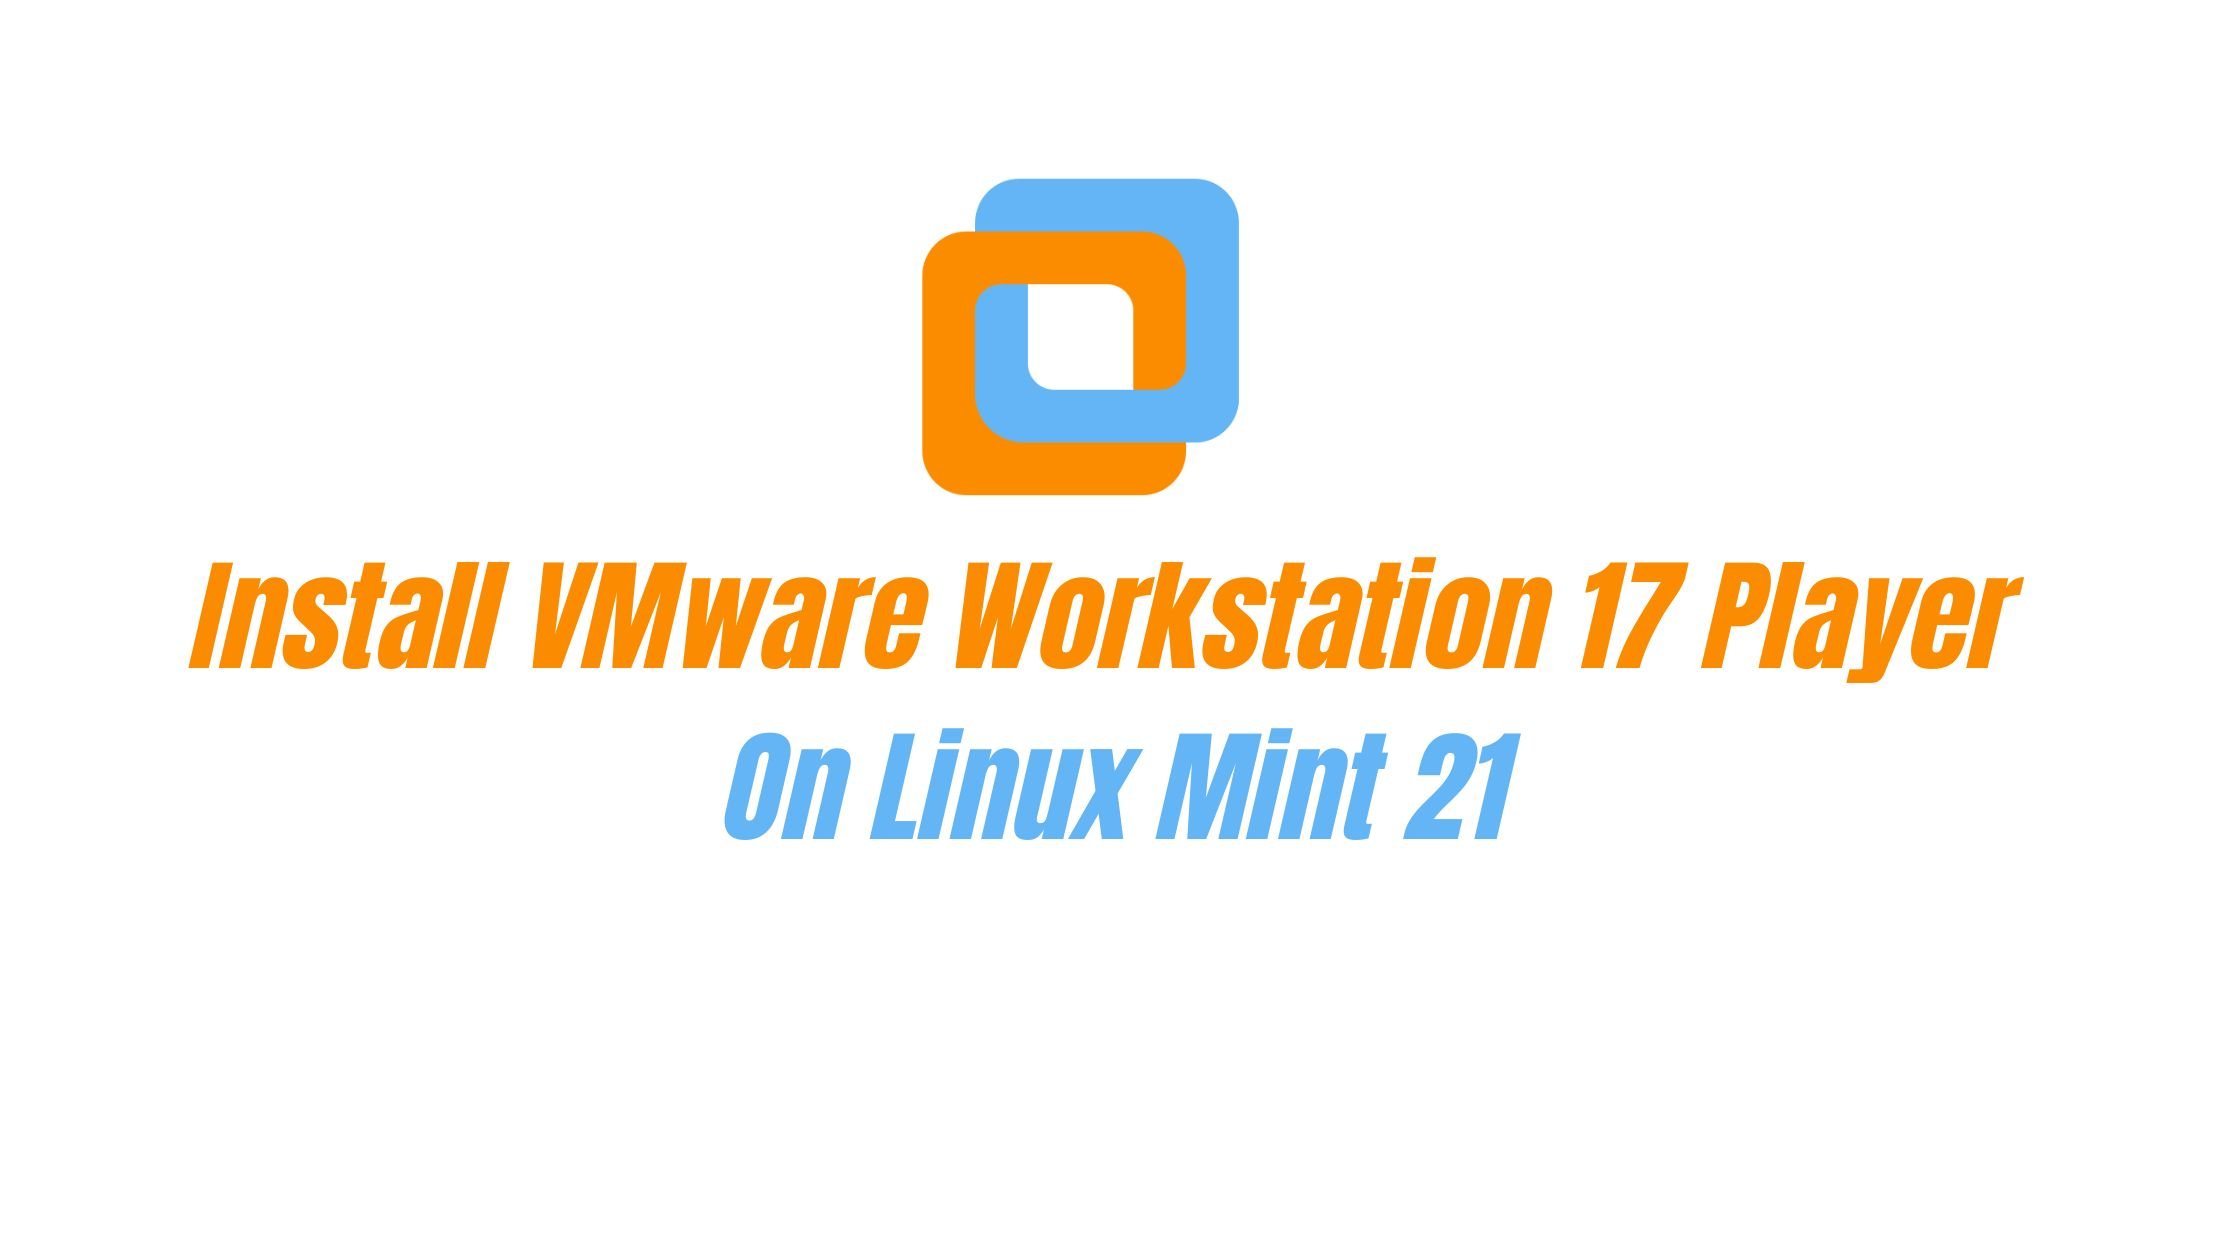 How To Install VMware Workstation 17 Player On Linux Mint 21